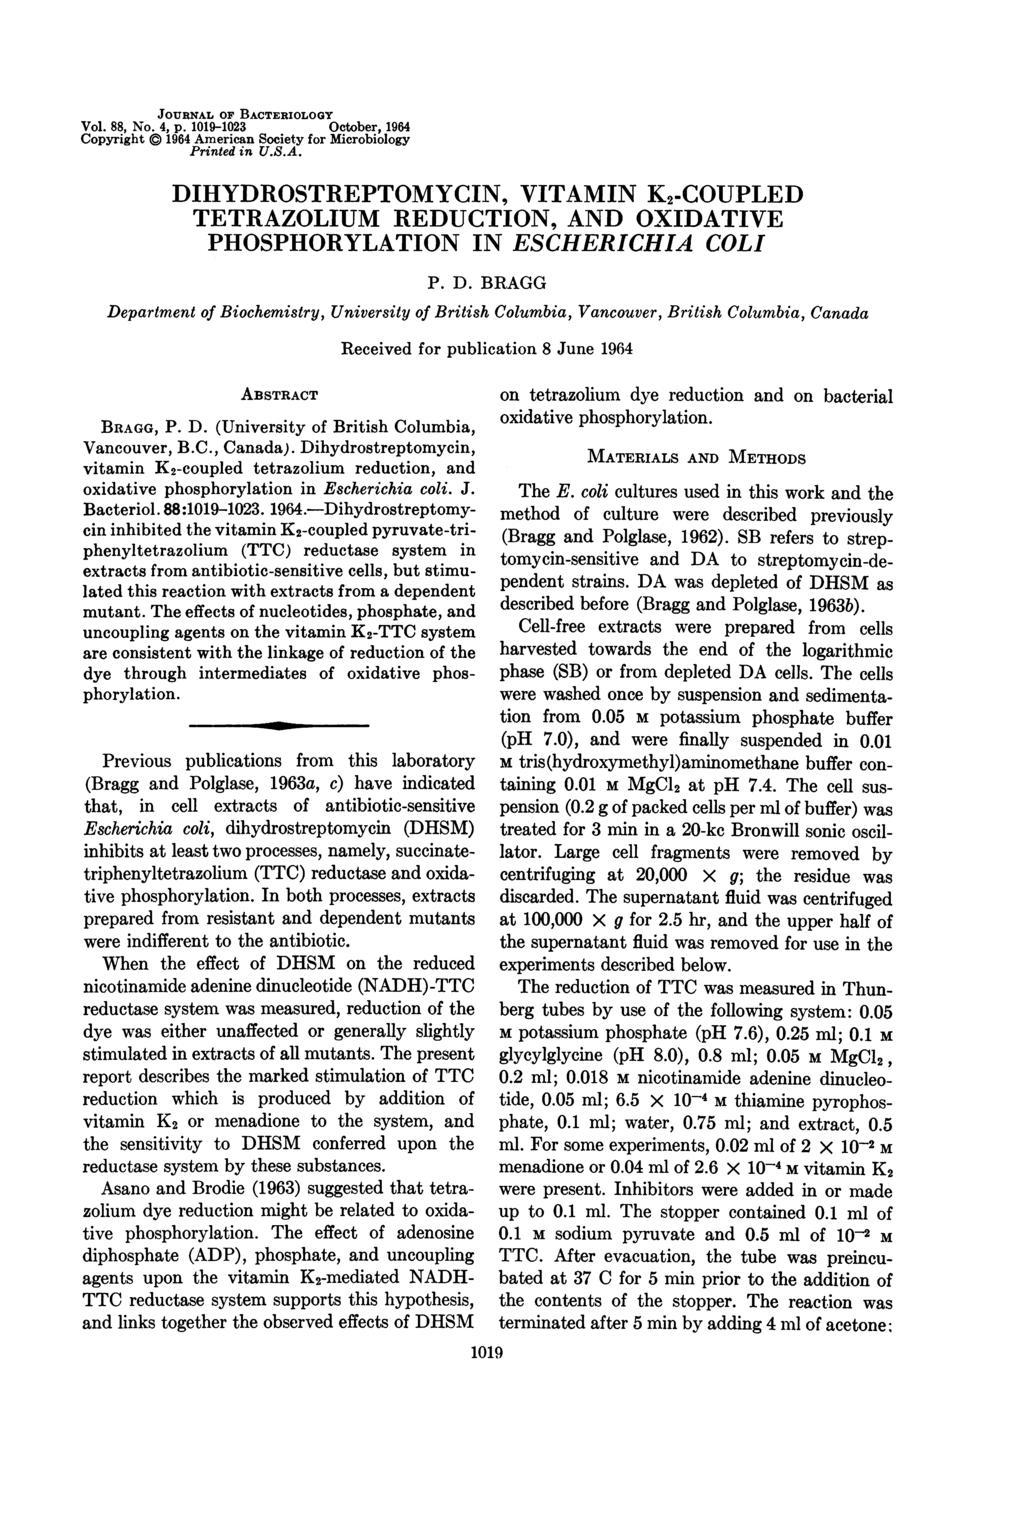 JOURNAL OF BACTERIOLOGY Vol. 88, No. 4, p. 1019-1023 October, 1964 Copyright 1964 American Society for Microbiology Printed in U.S.A. DIHYDROSTREPTOMYCIN, VITAMIN K2-COUPLED TETRAZOLIUM REDUCTION, AND OXIDATIVE PHOSPHORYLATION IN ESCHERICHIA COLI P.